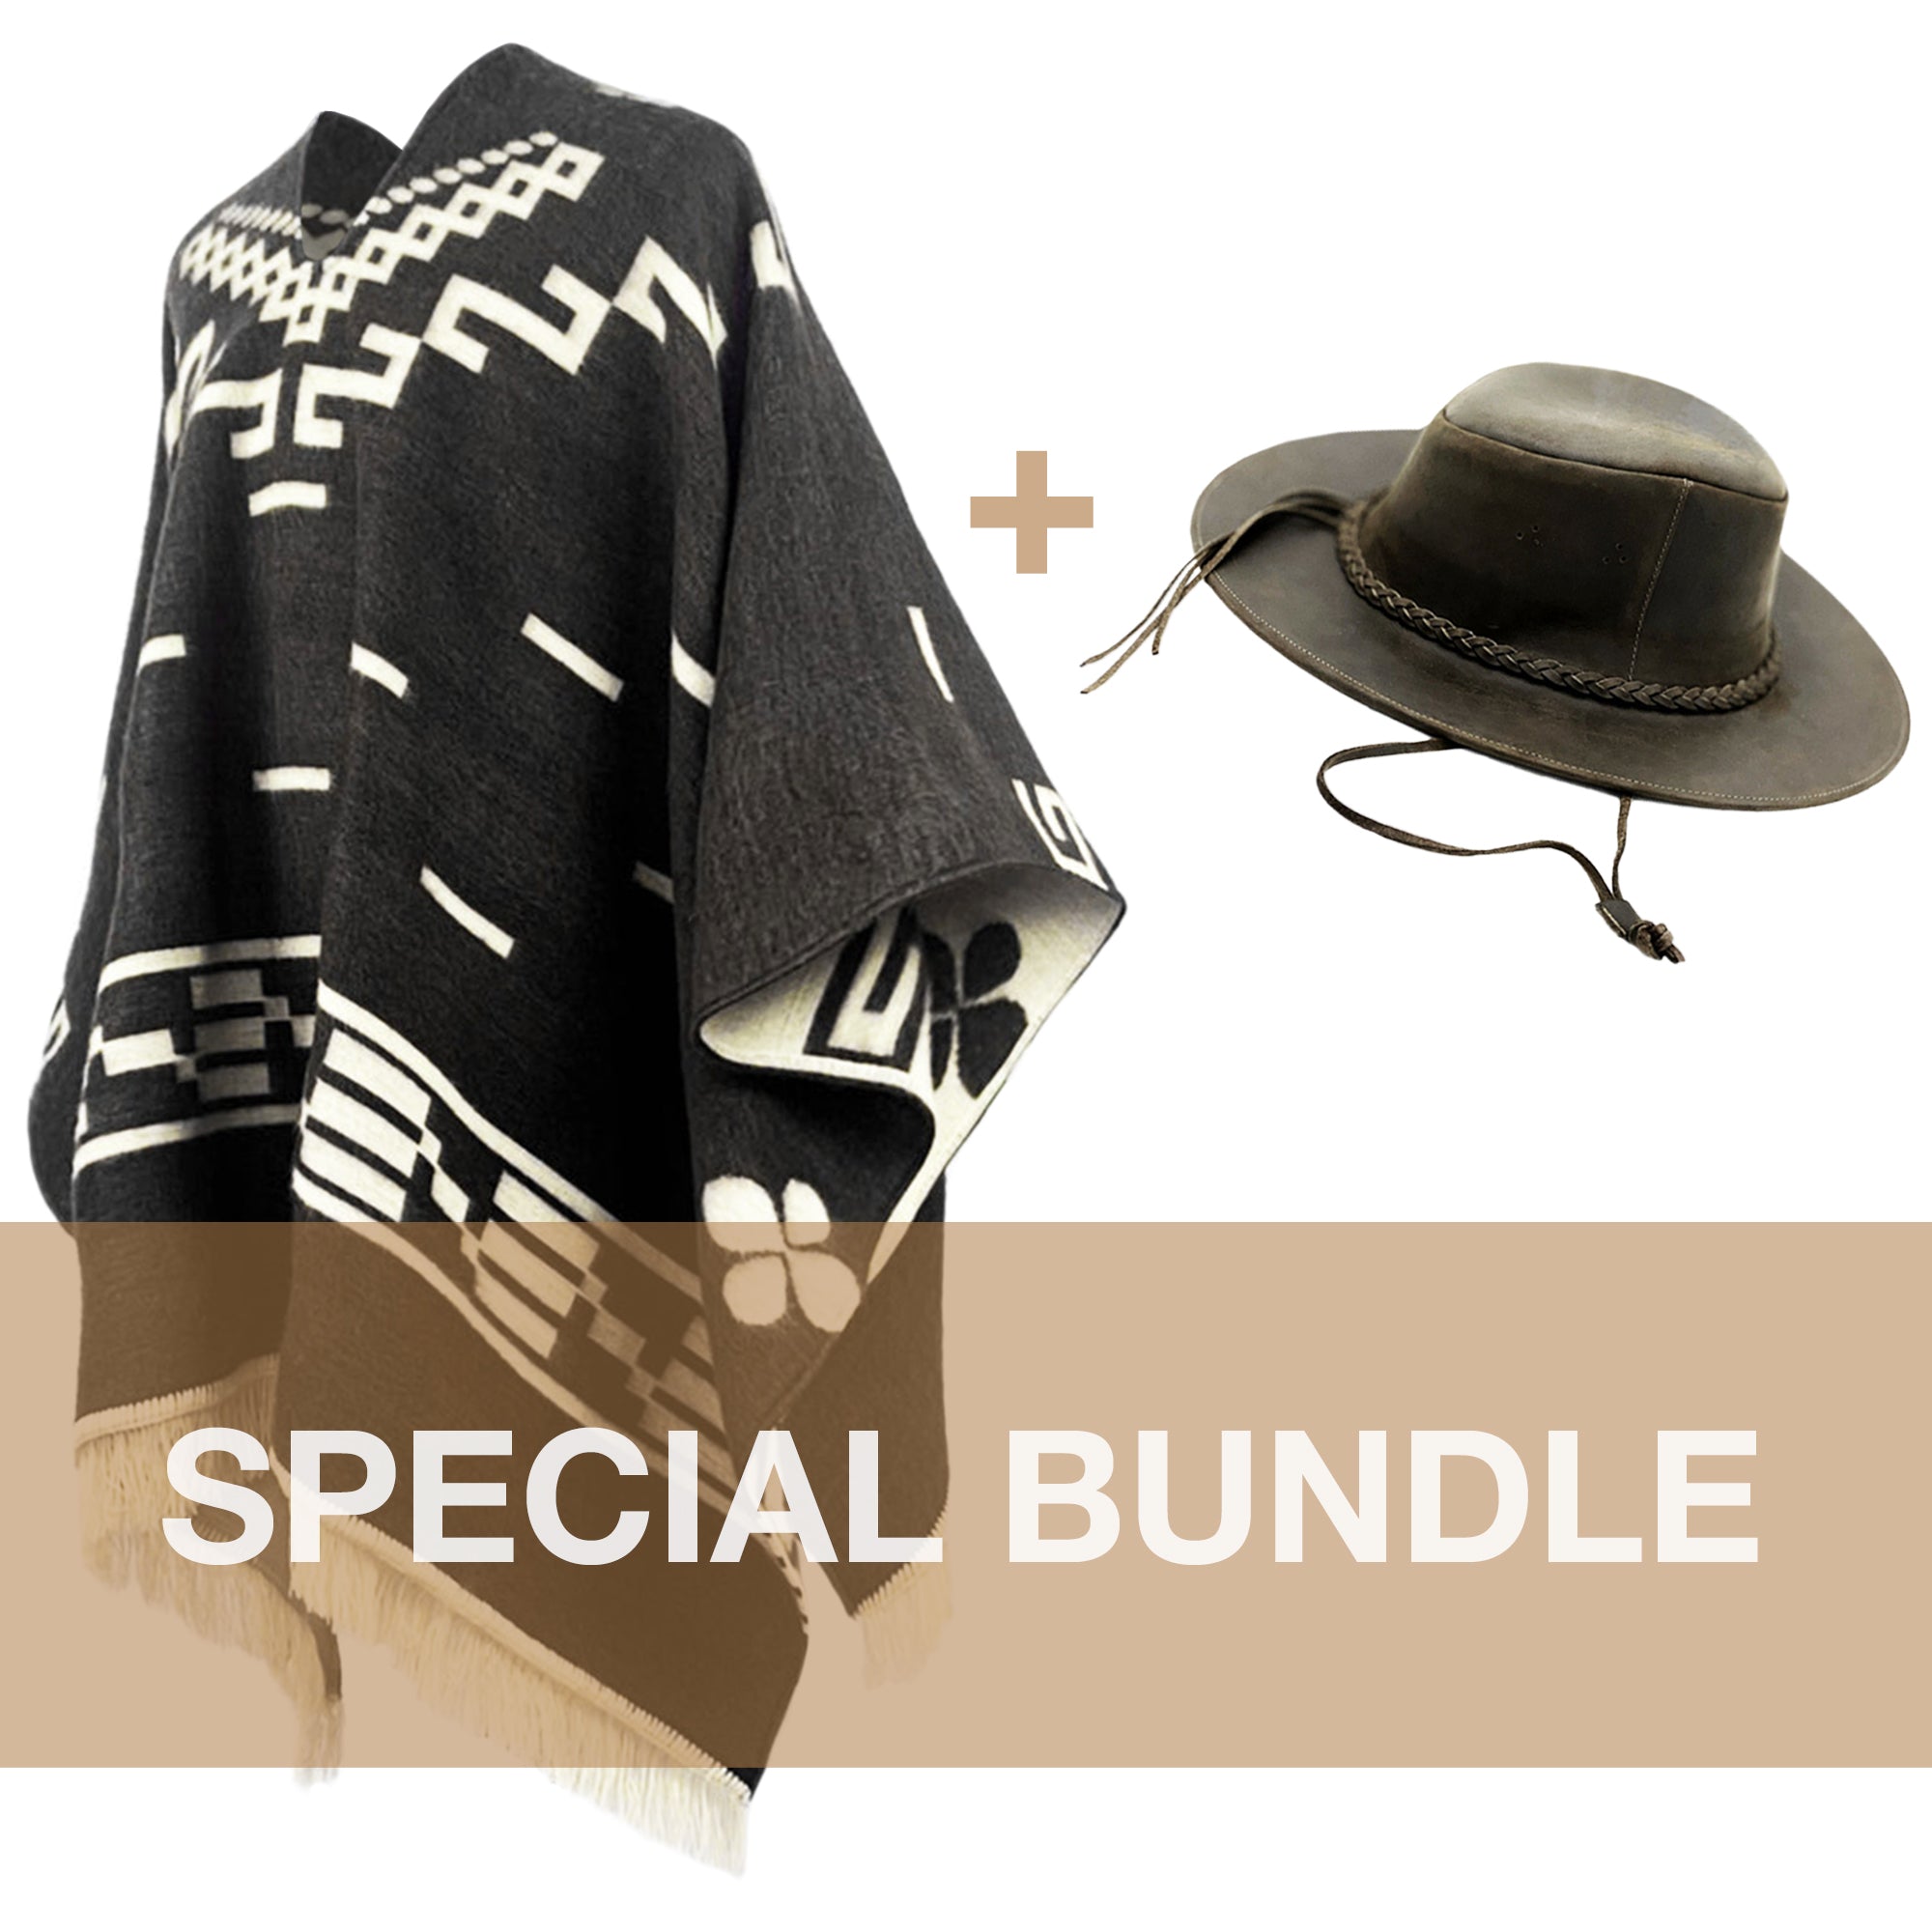 Clint Eastwood Western Cowboy bundle - buy a poncho and a hat and SAVE!